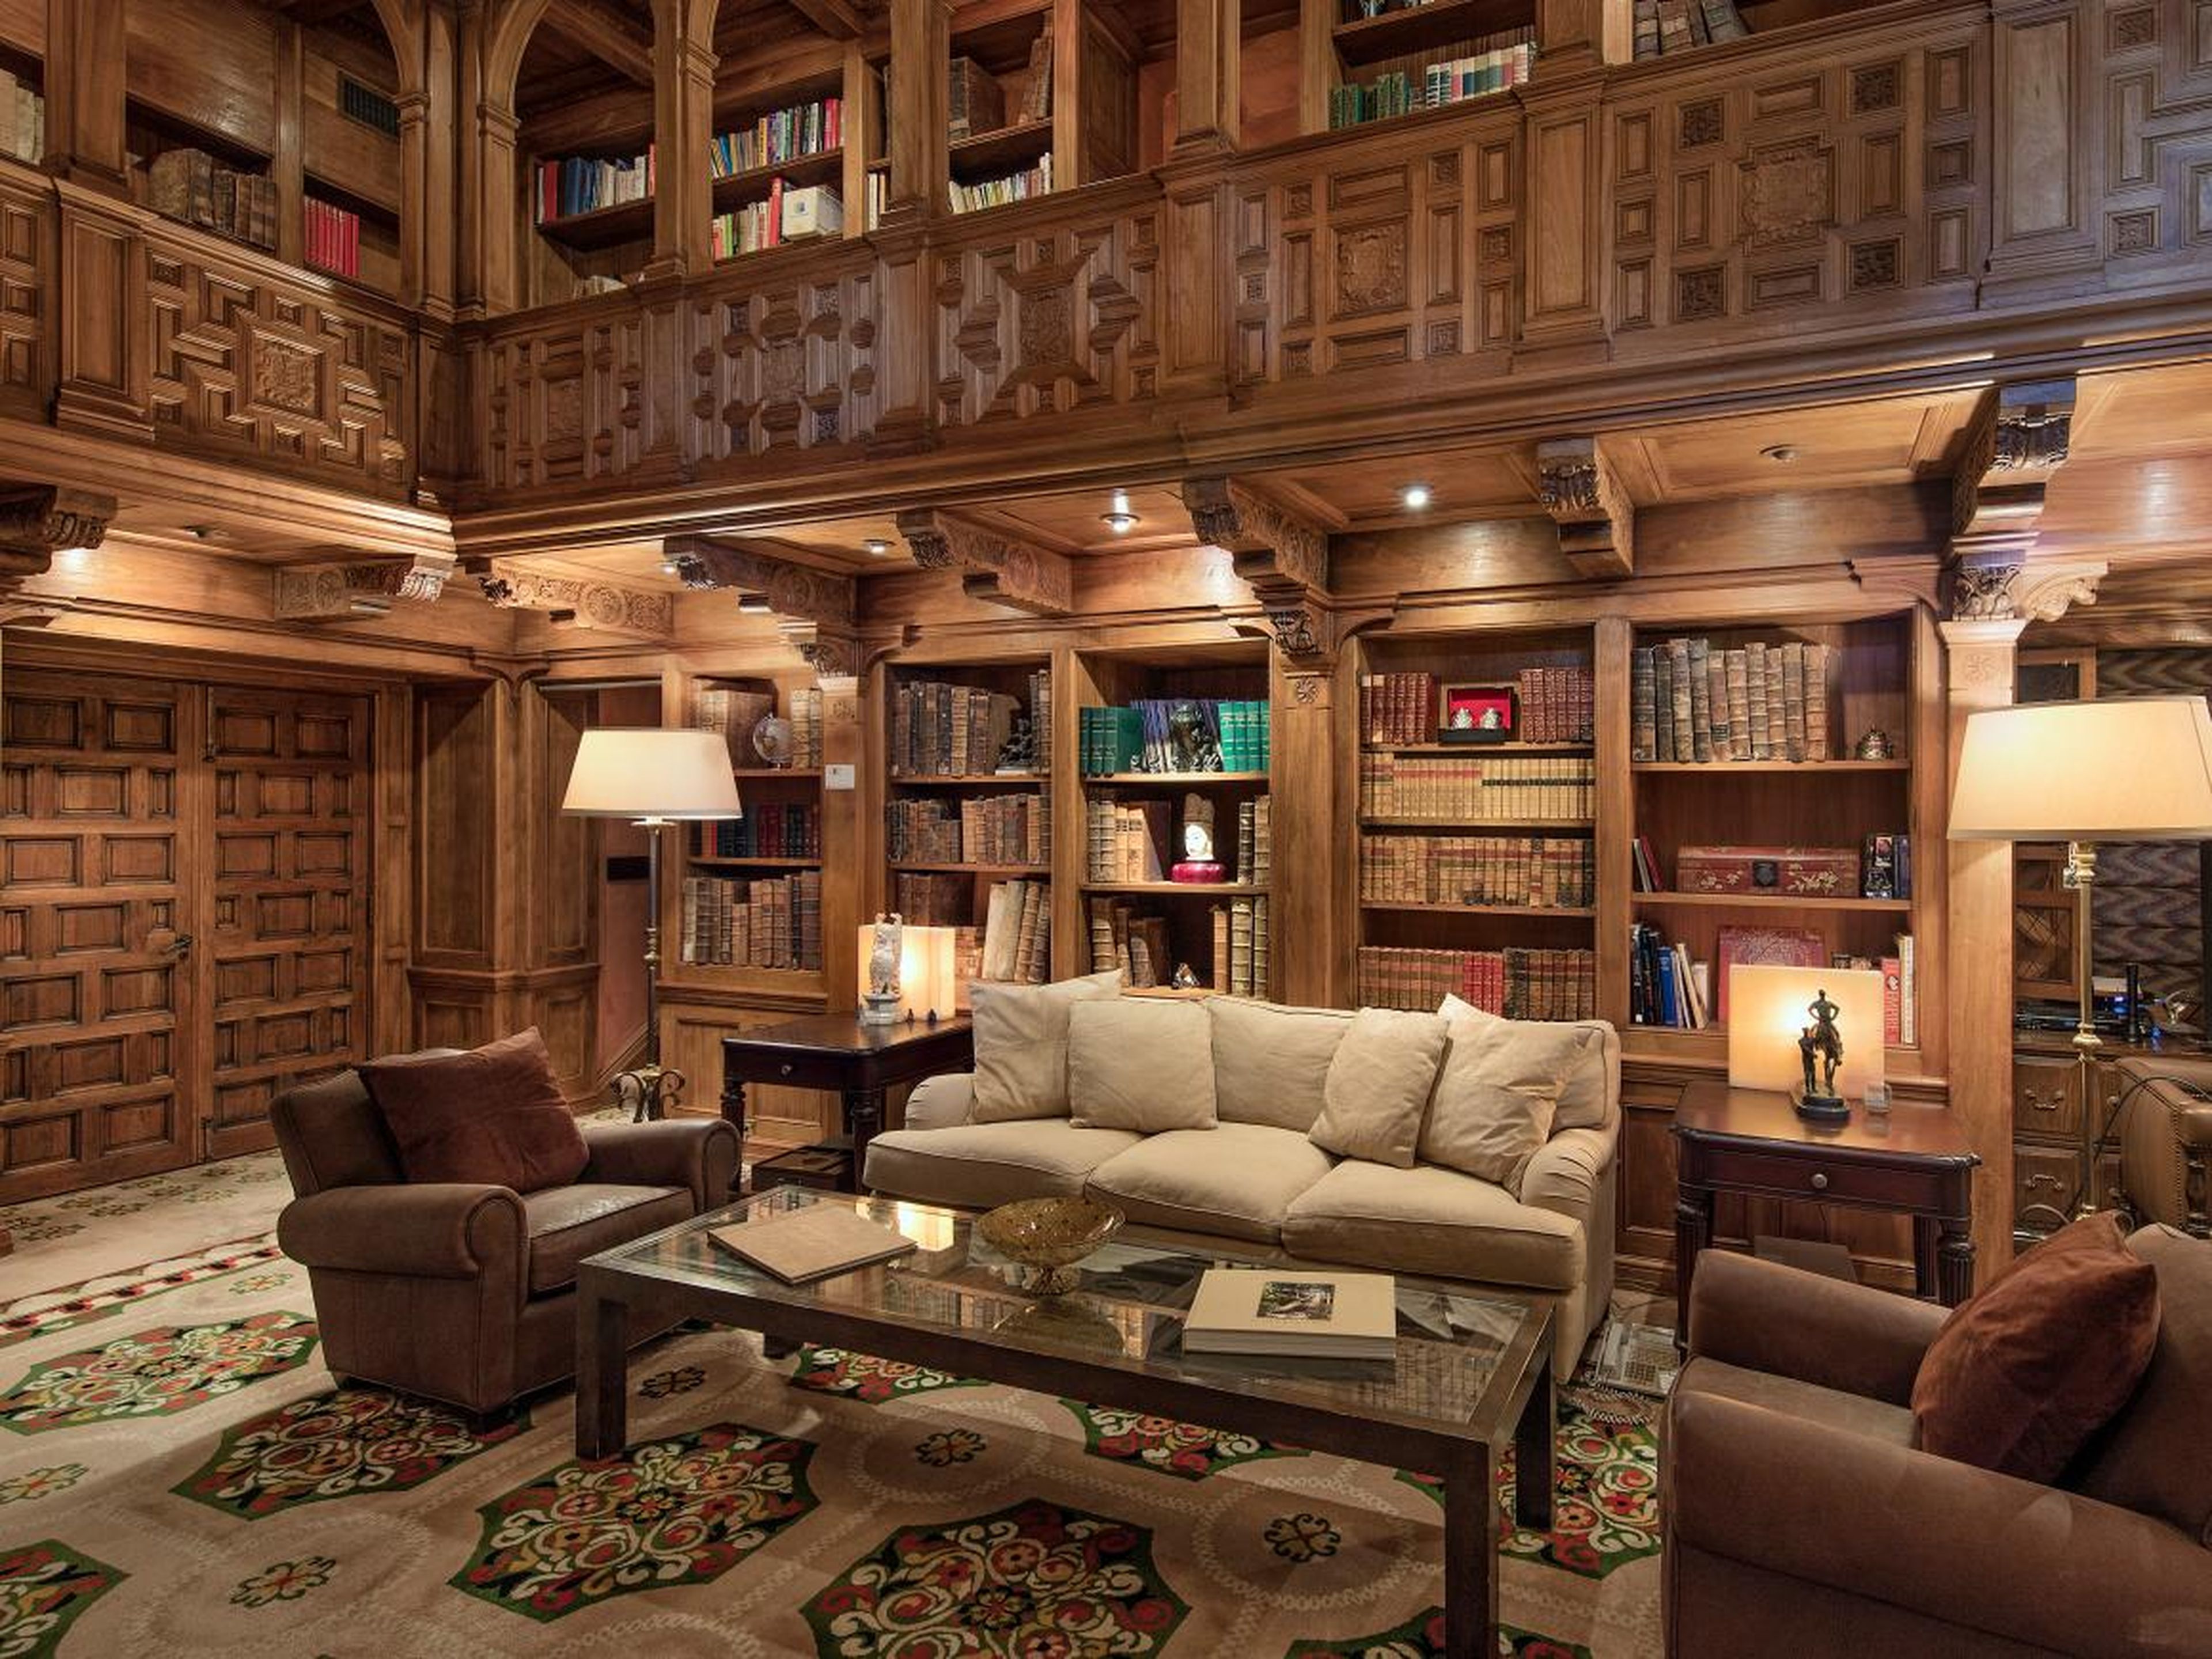 It includes an expansive, two-story library with hand-carved paneling and a detailed ceiling.